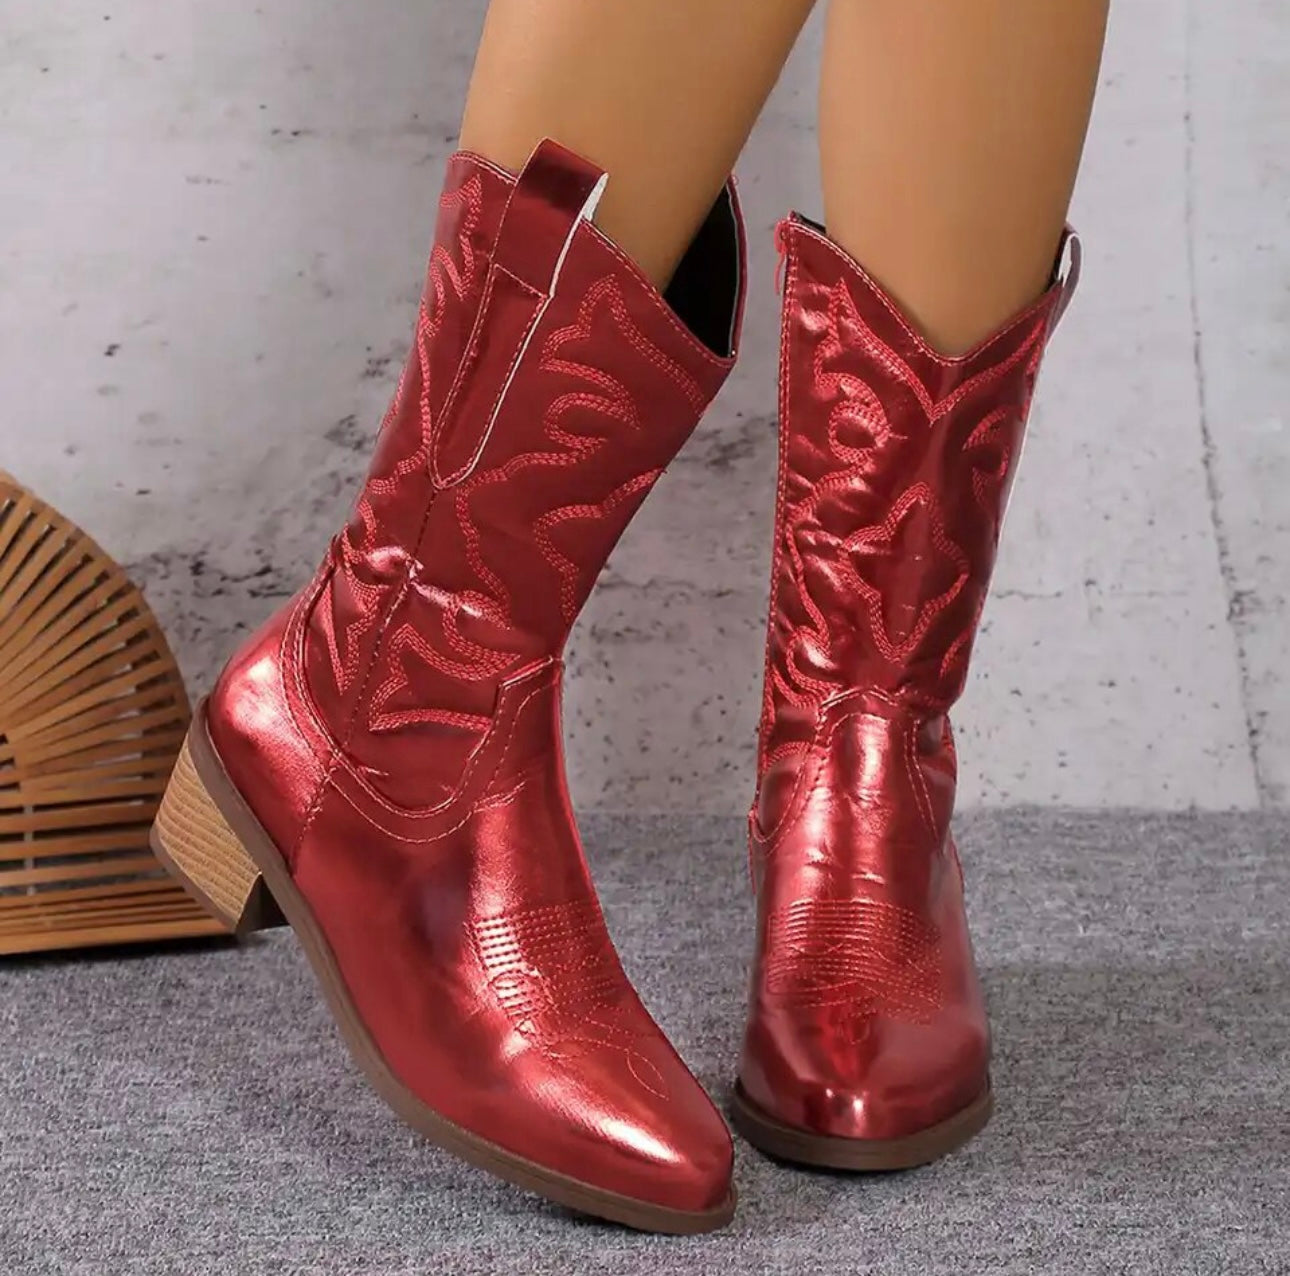 The Classic Cowgirl Boots (Comes In Other Gorgeous Colors)